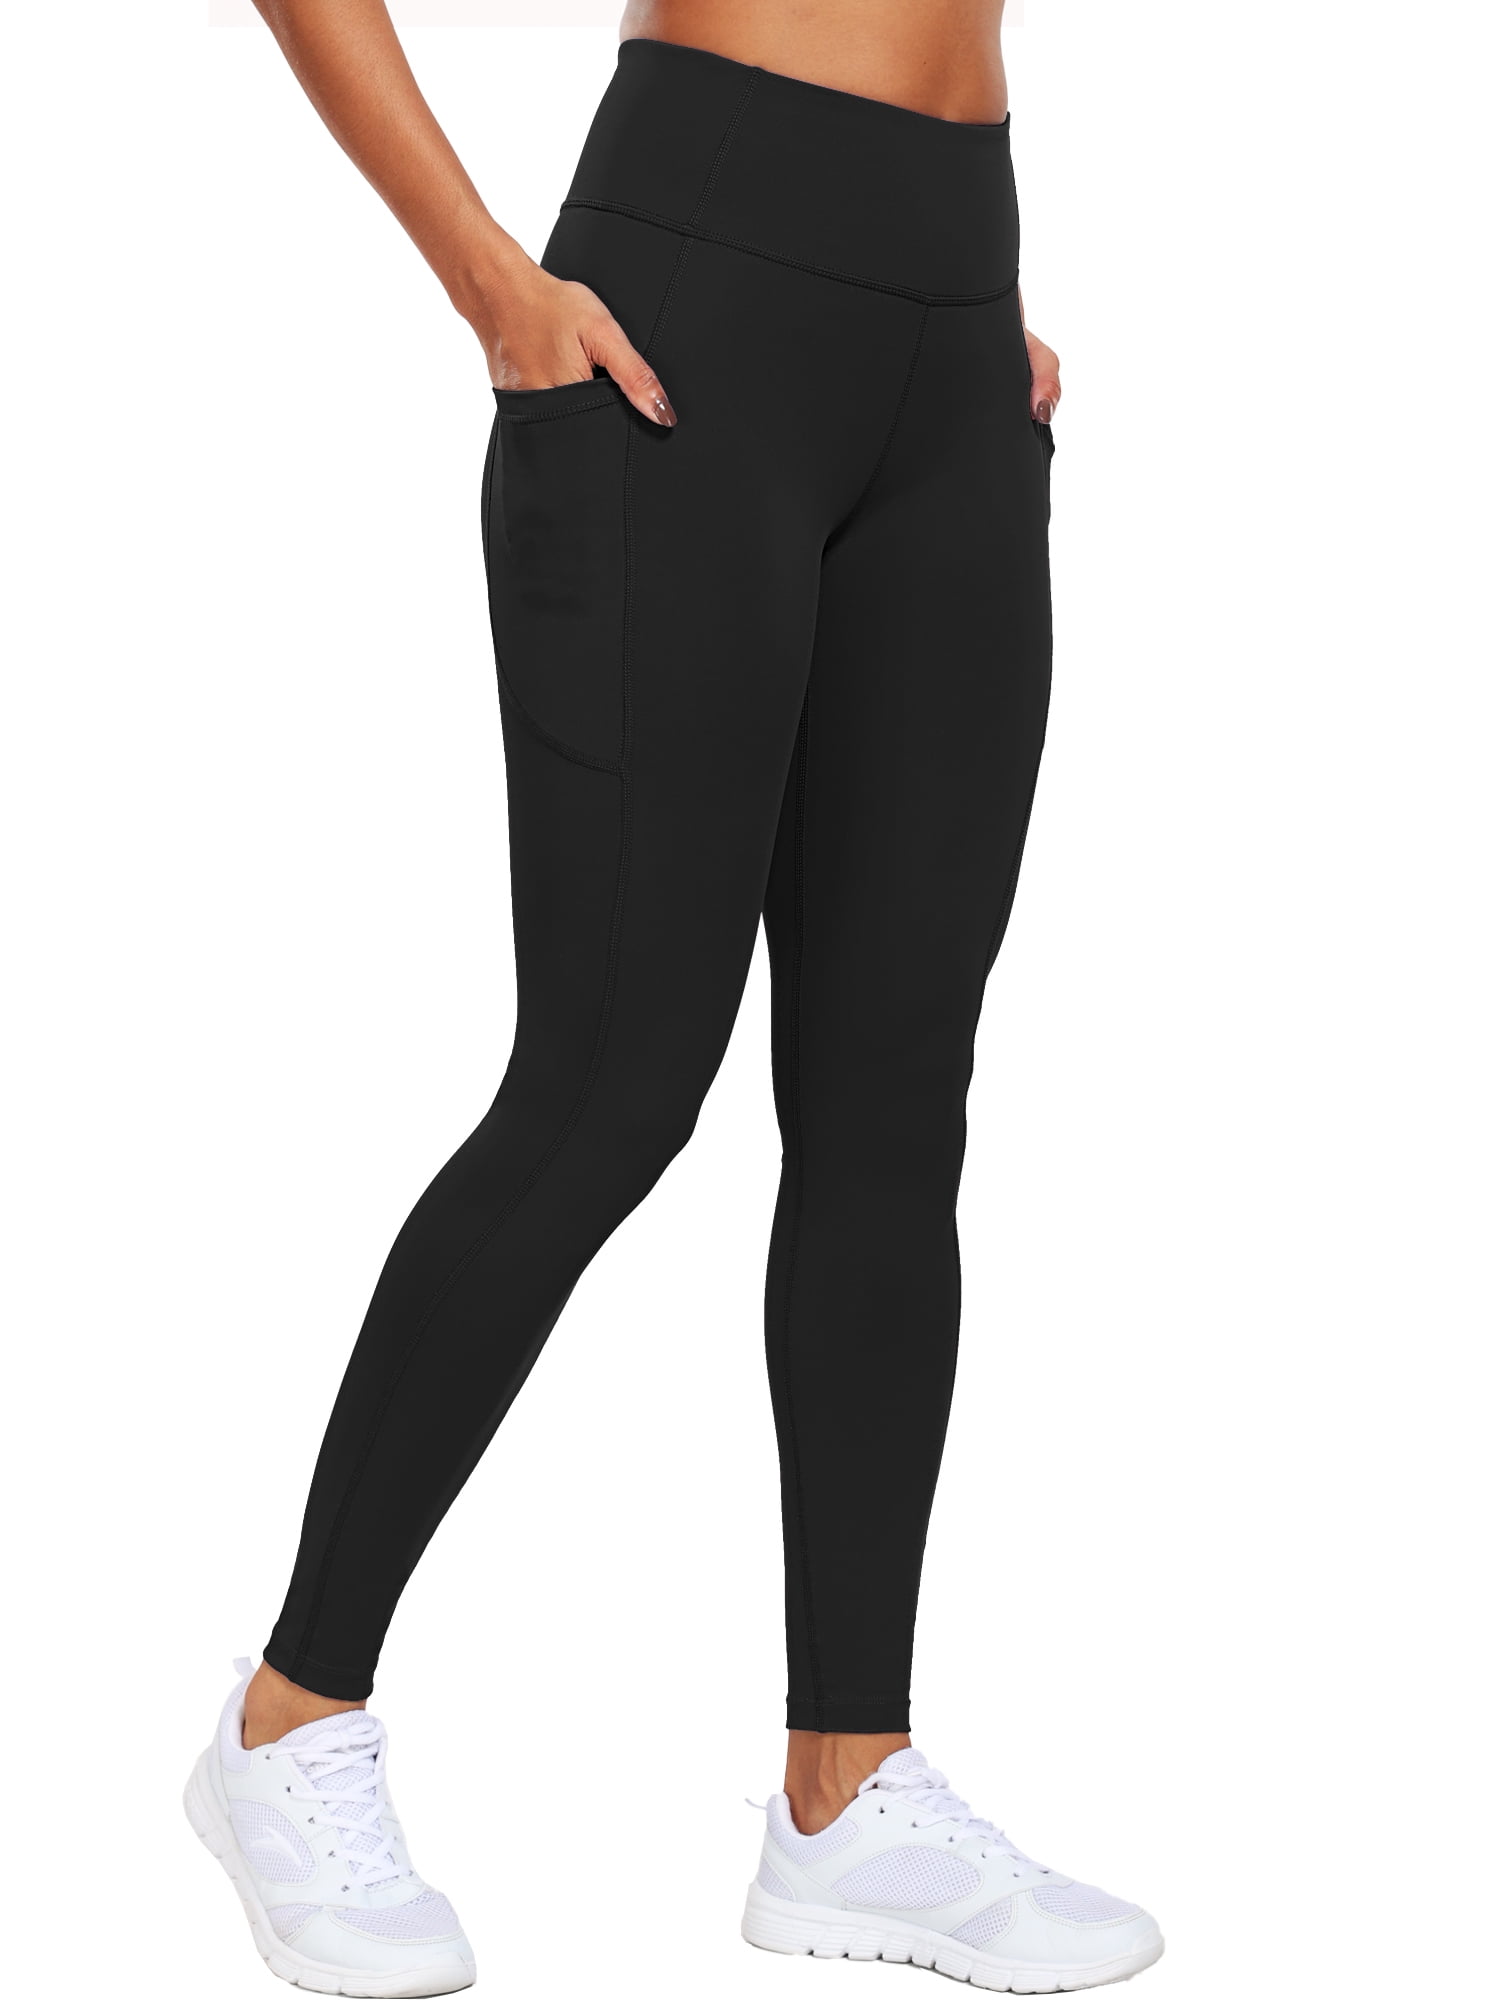 Junior's Just Dance V415 Black Athletic Workout Leggings Thights One Size +  (XL-3XL)